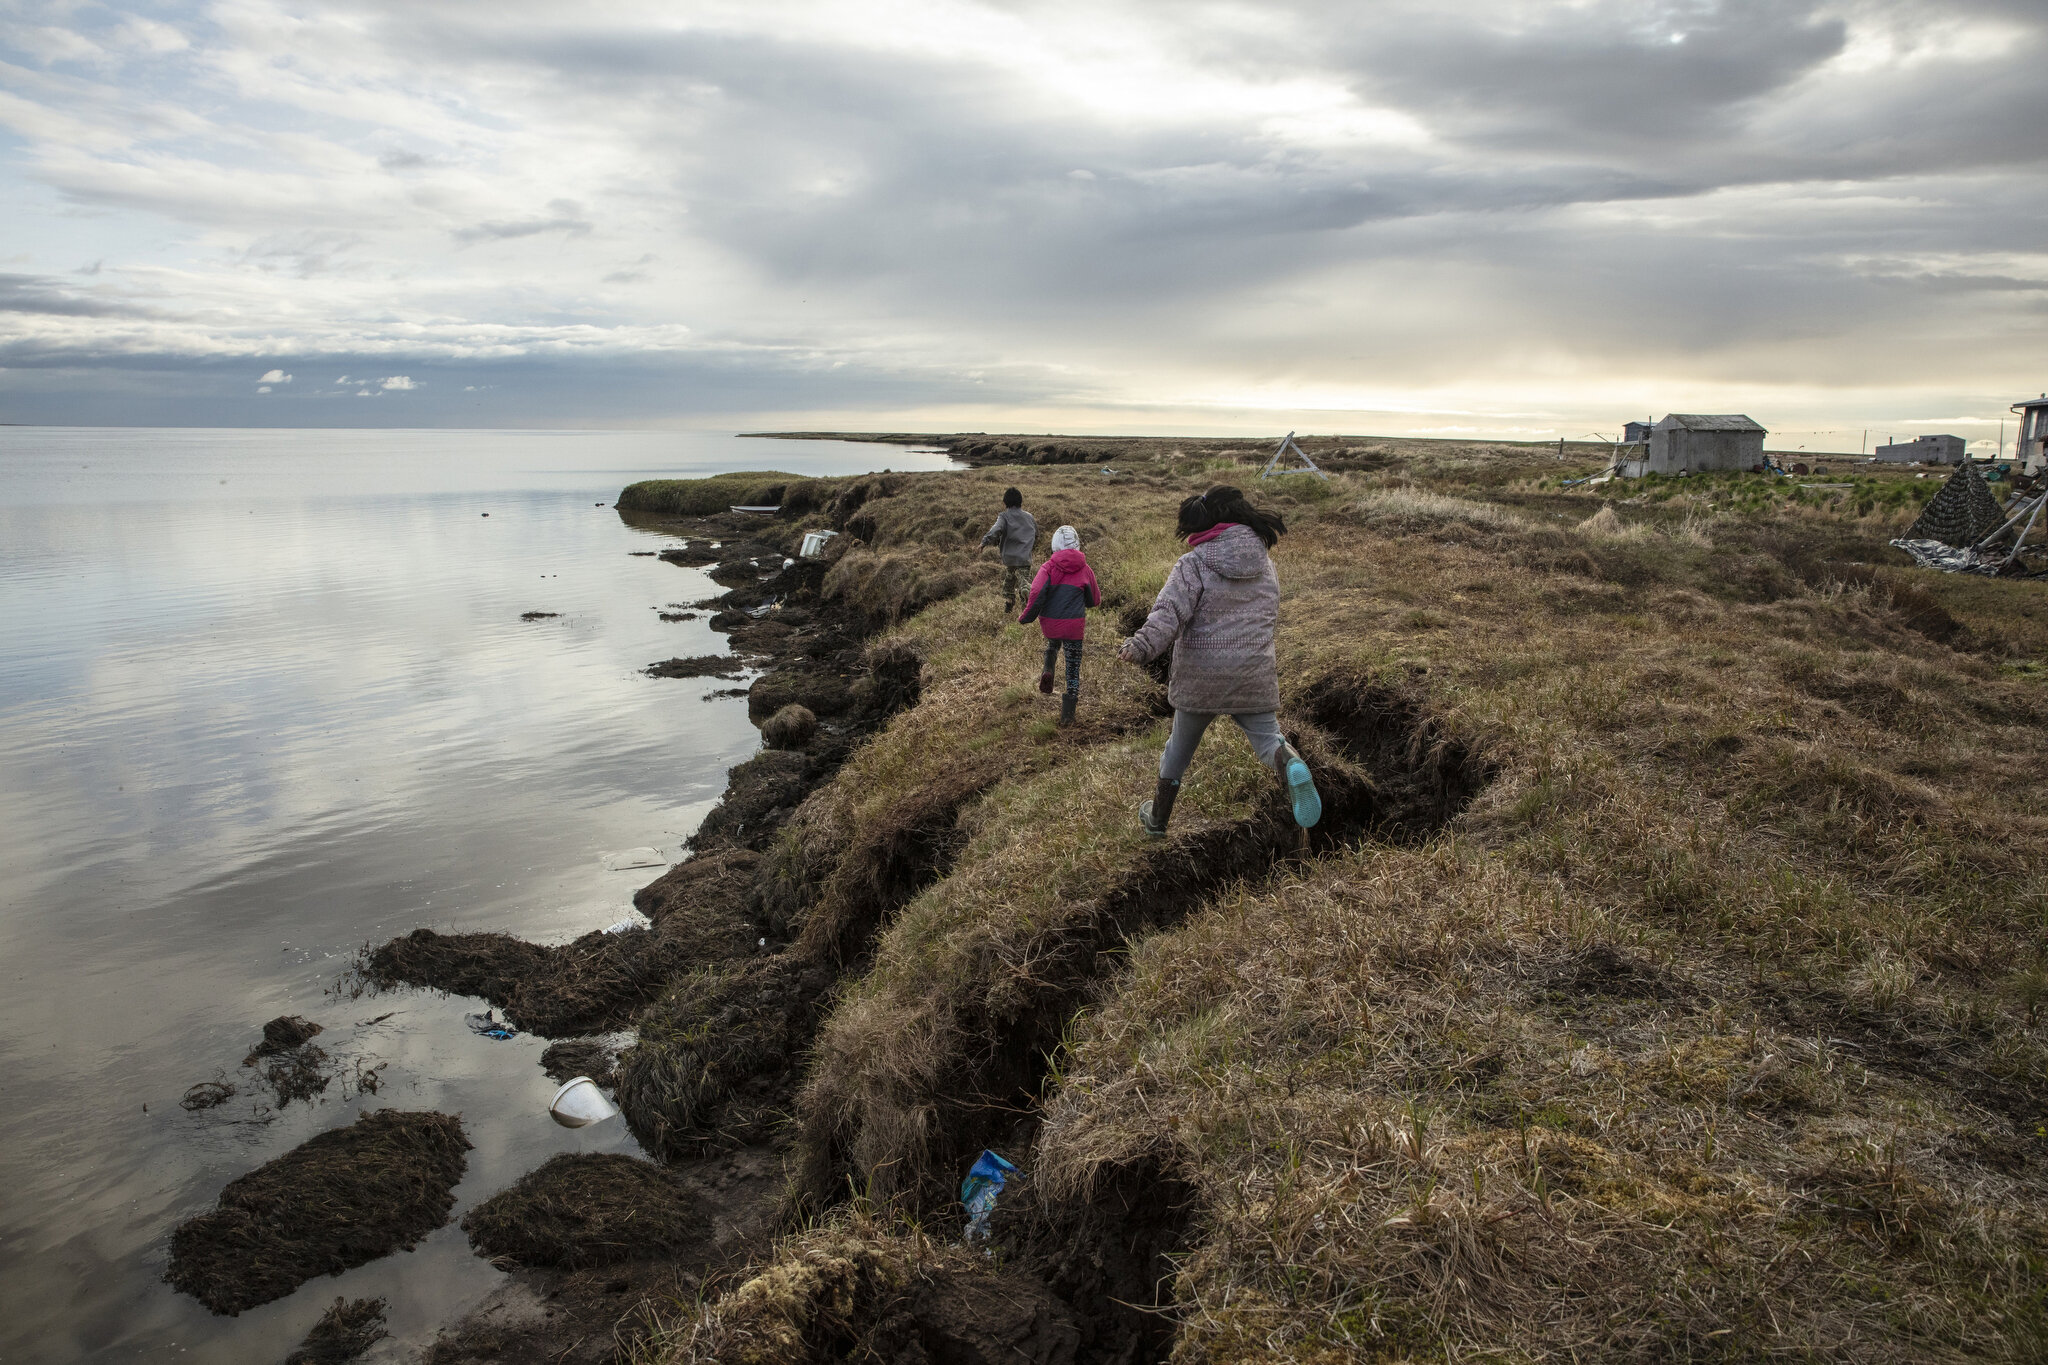  Children in Newtok, Alaska, play near crumbling permafrost cliffs that are now within a few dozen feet of numerous homes. While I was photographing there, multiple unsafe homes were being demolished, and a handful of families were in the process of 